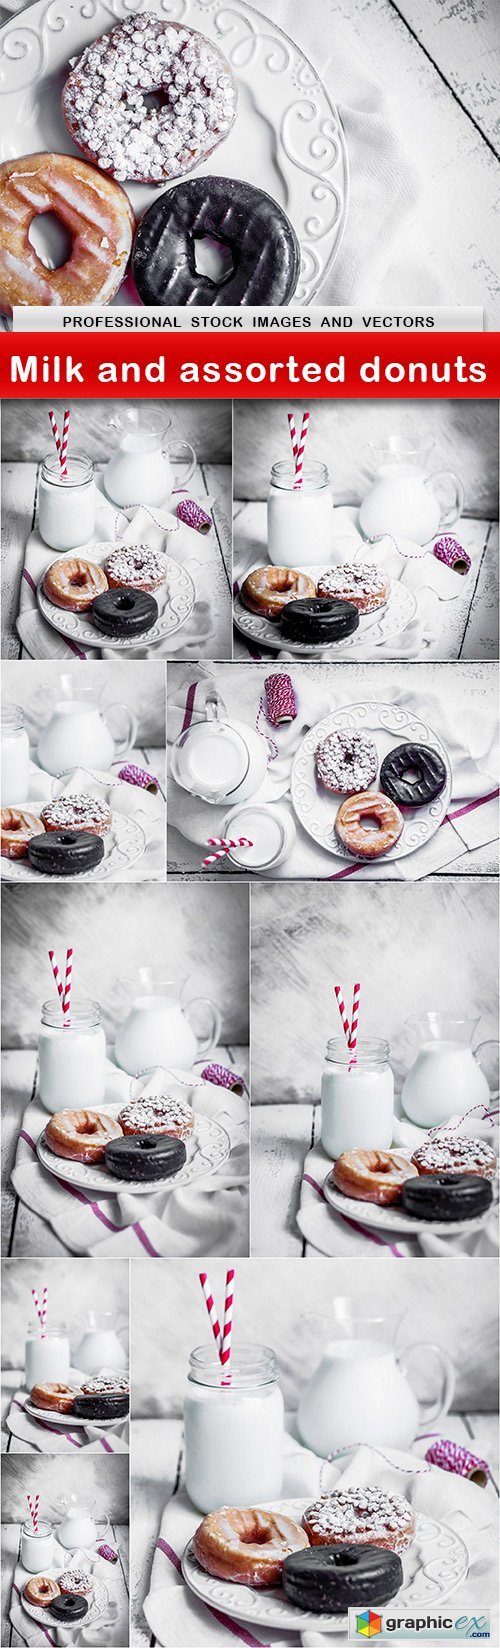 Milk and assorted donuts - 10 UHQ JPEG